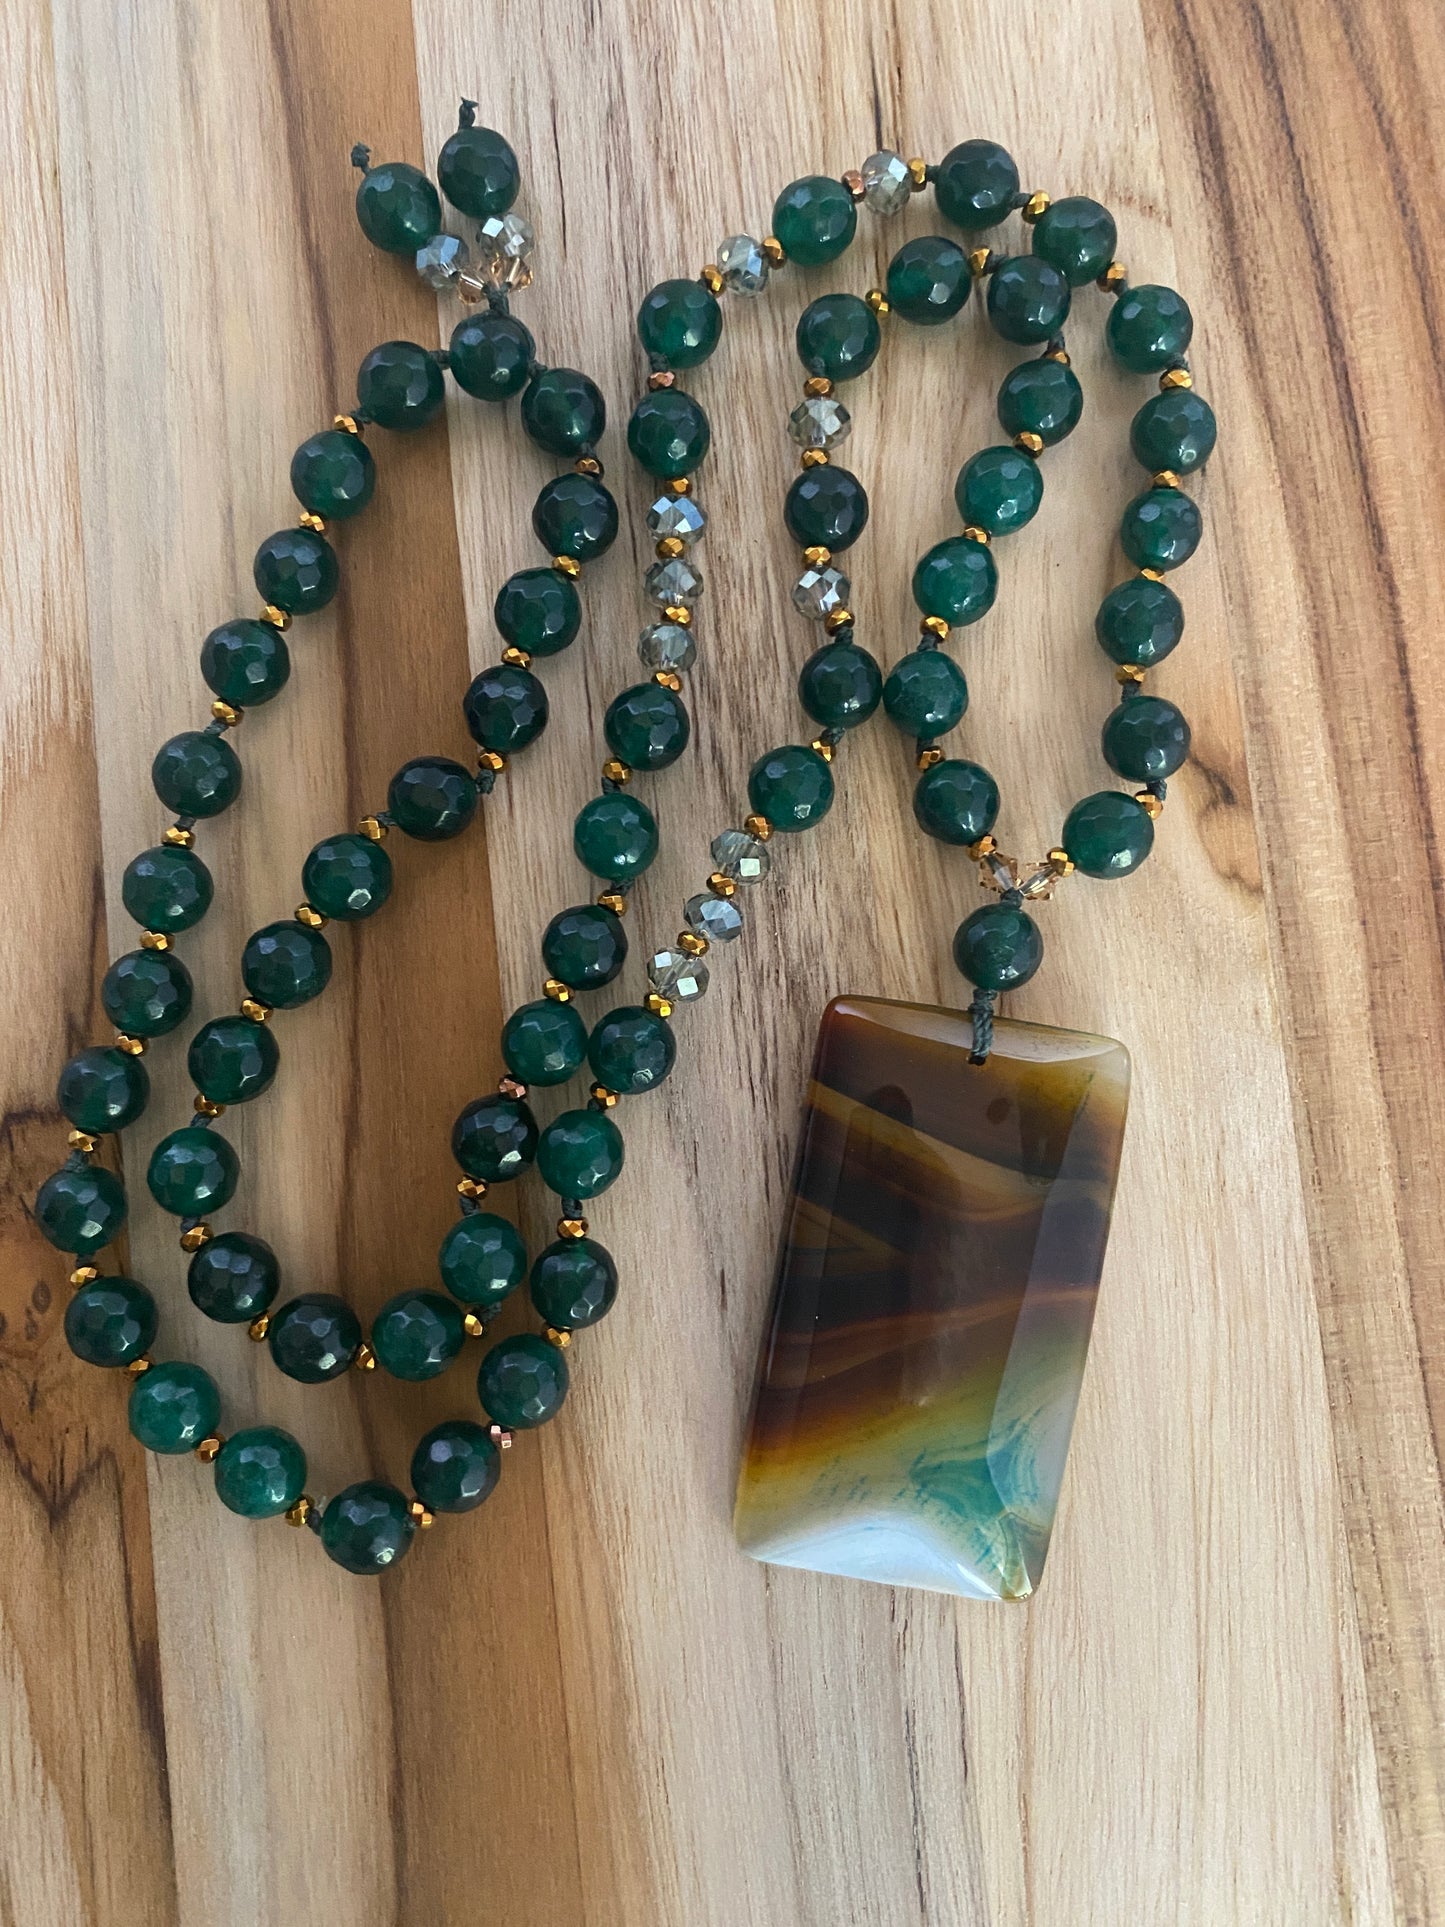 28" Long Brown & Green Agate Pendant Beaded Necklace with Green Agate & Crystal Beads